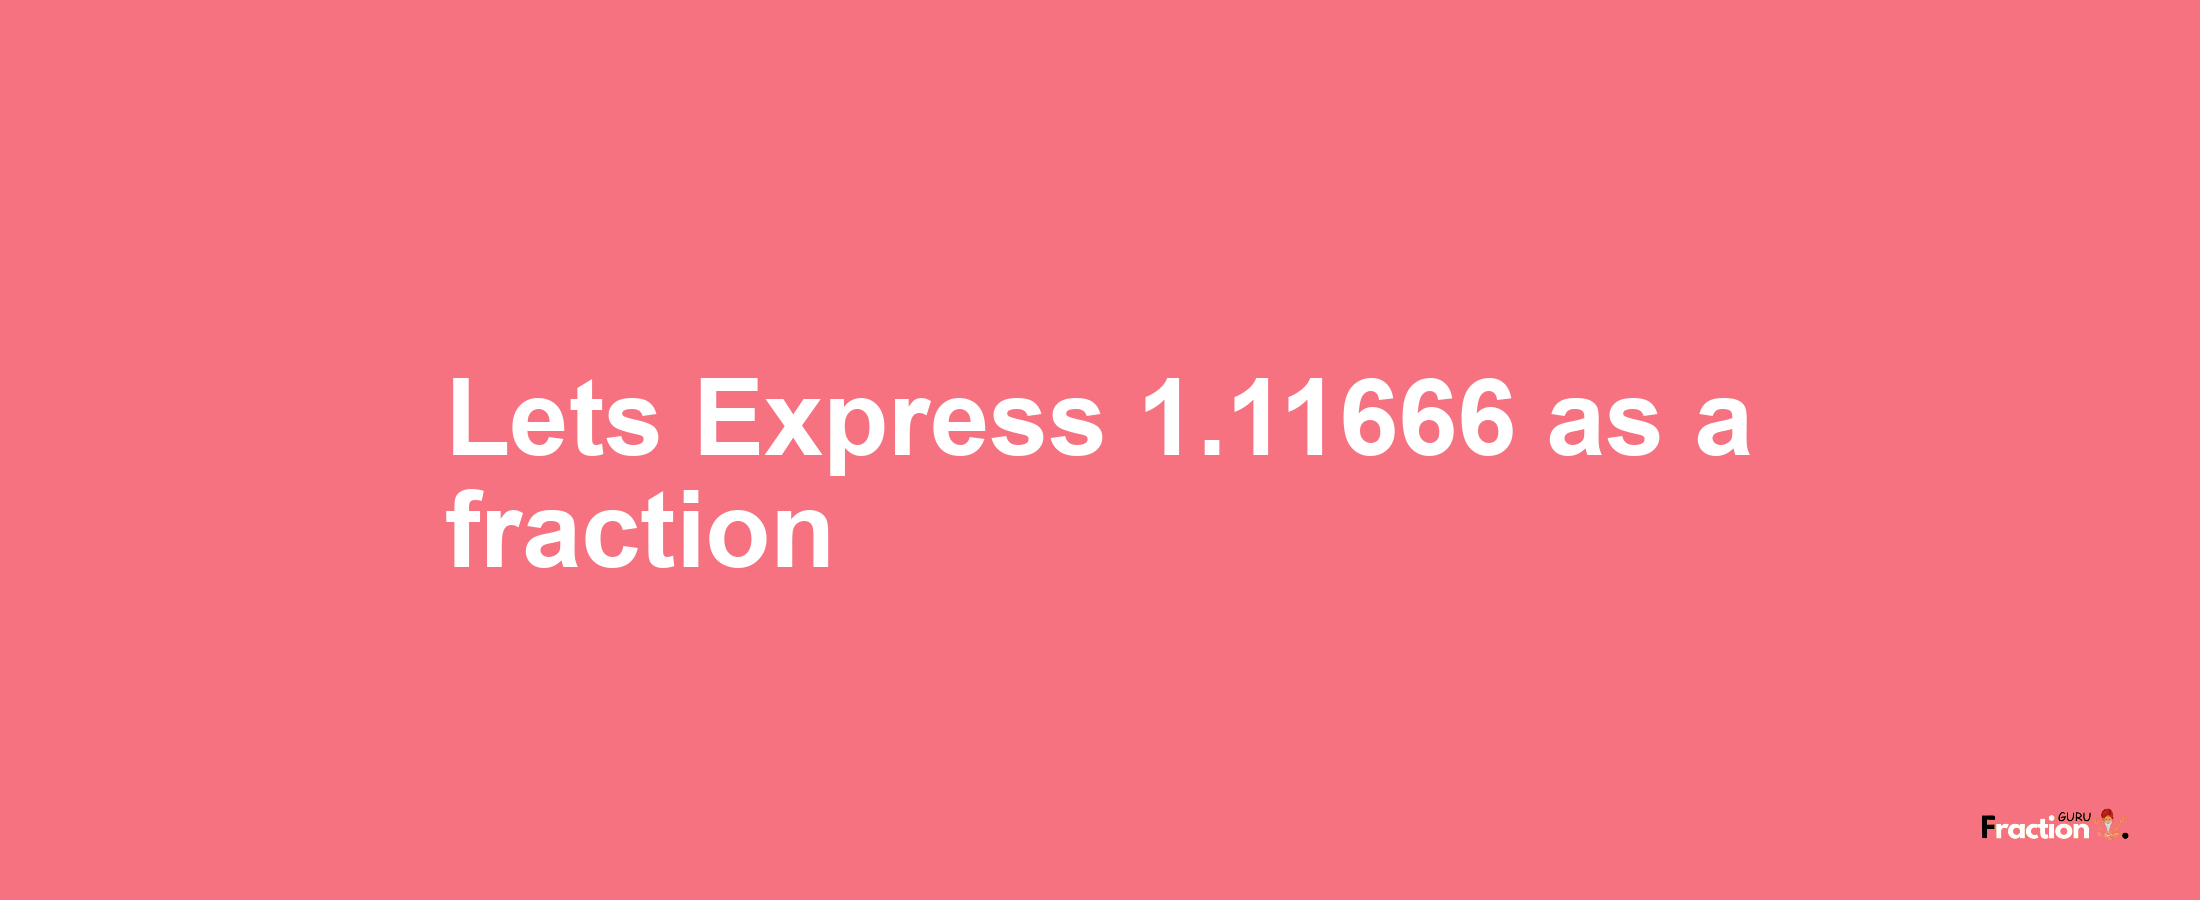 Lets Express 1.11666 as afraction